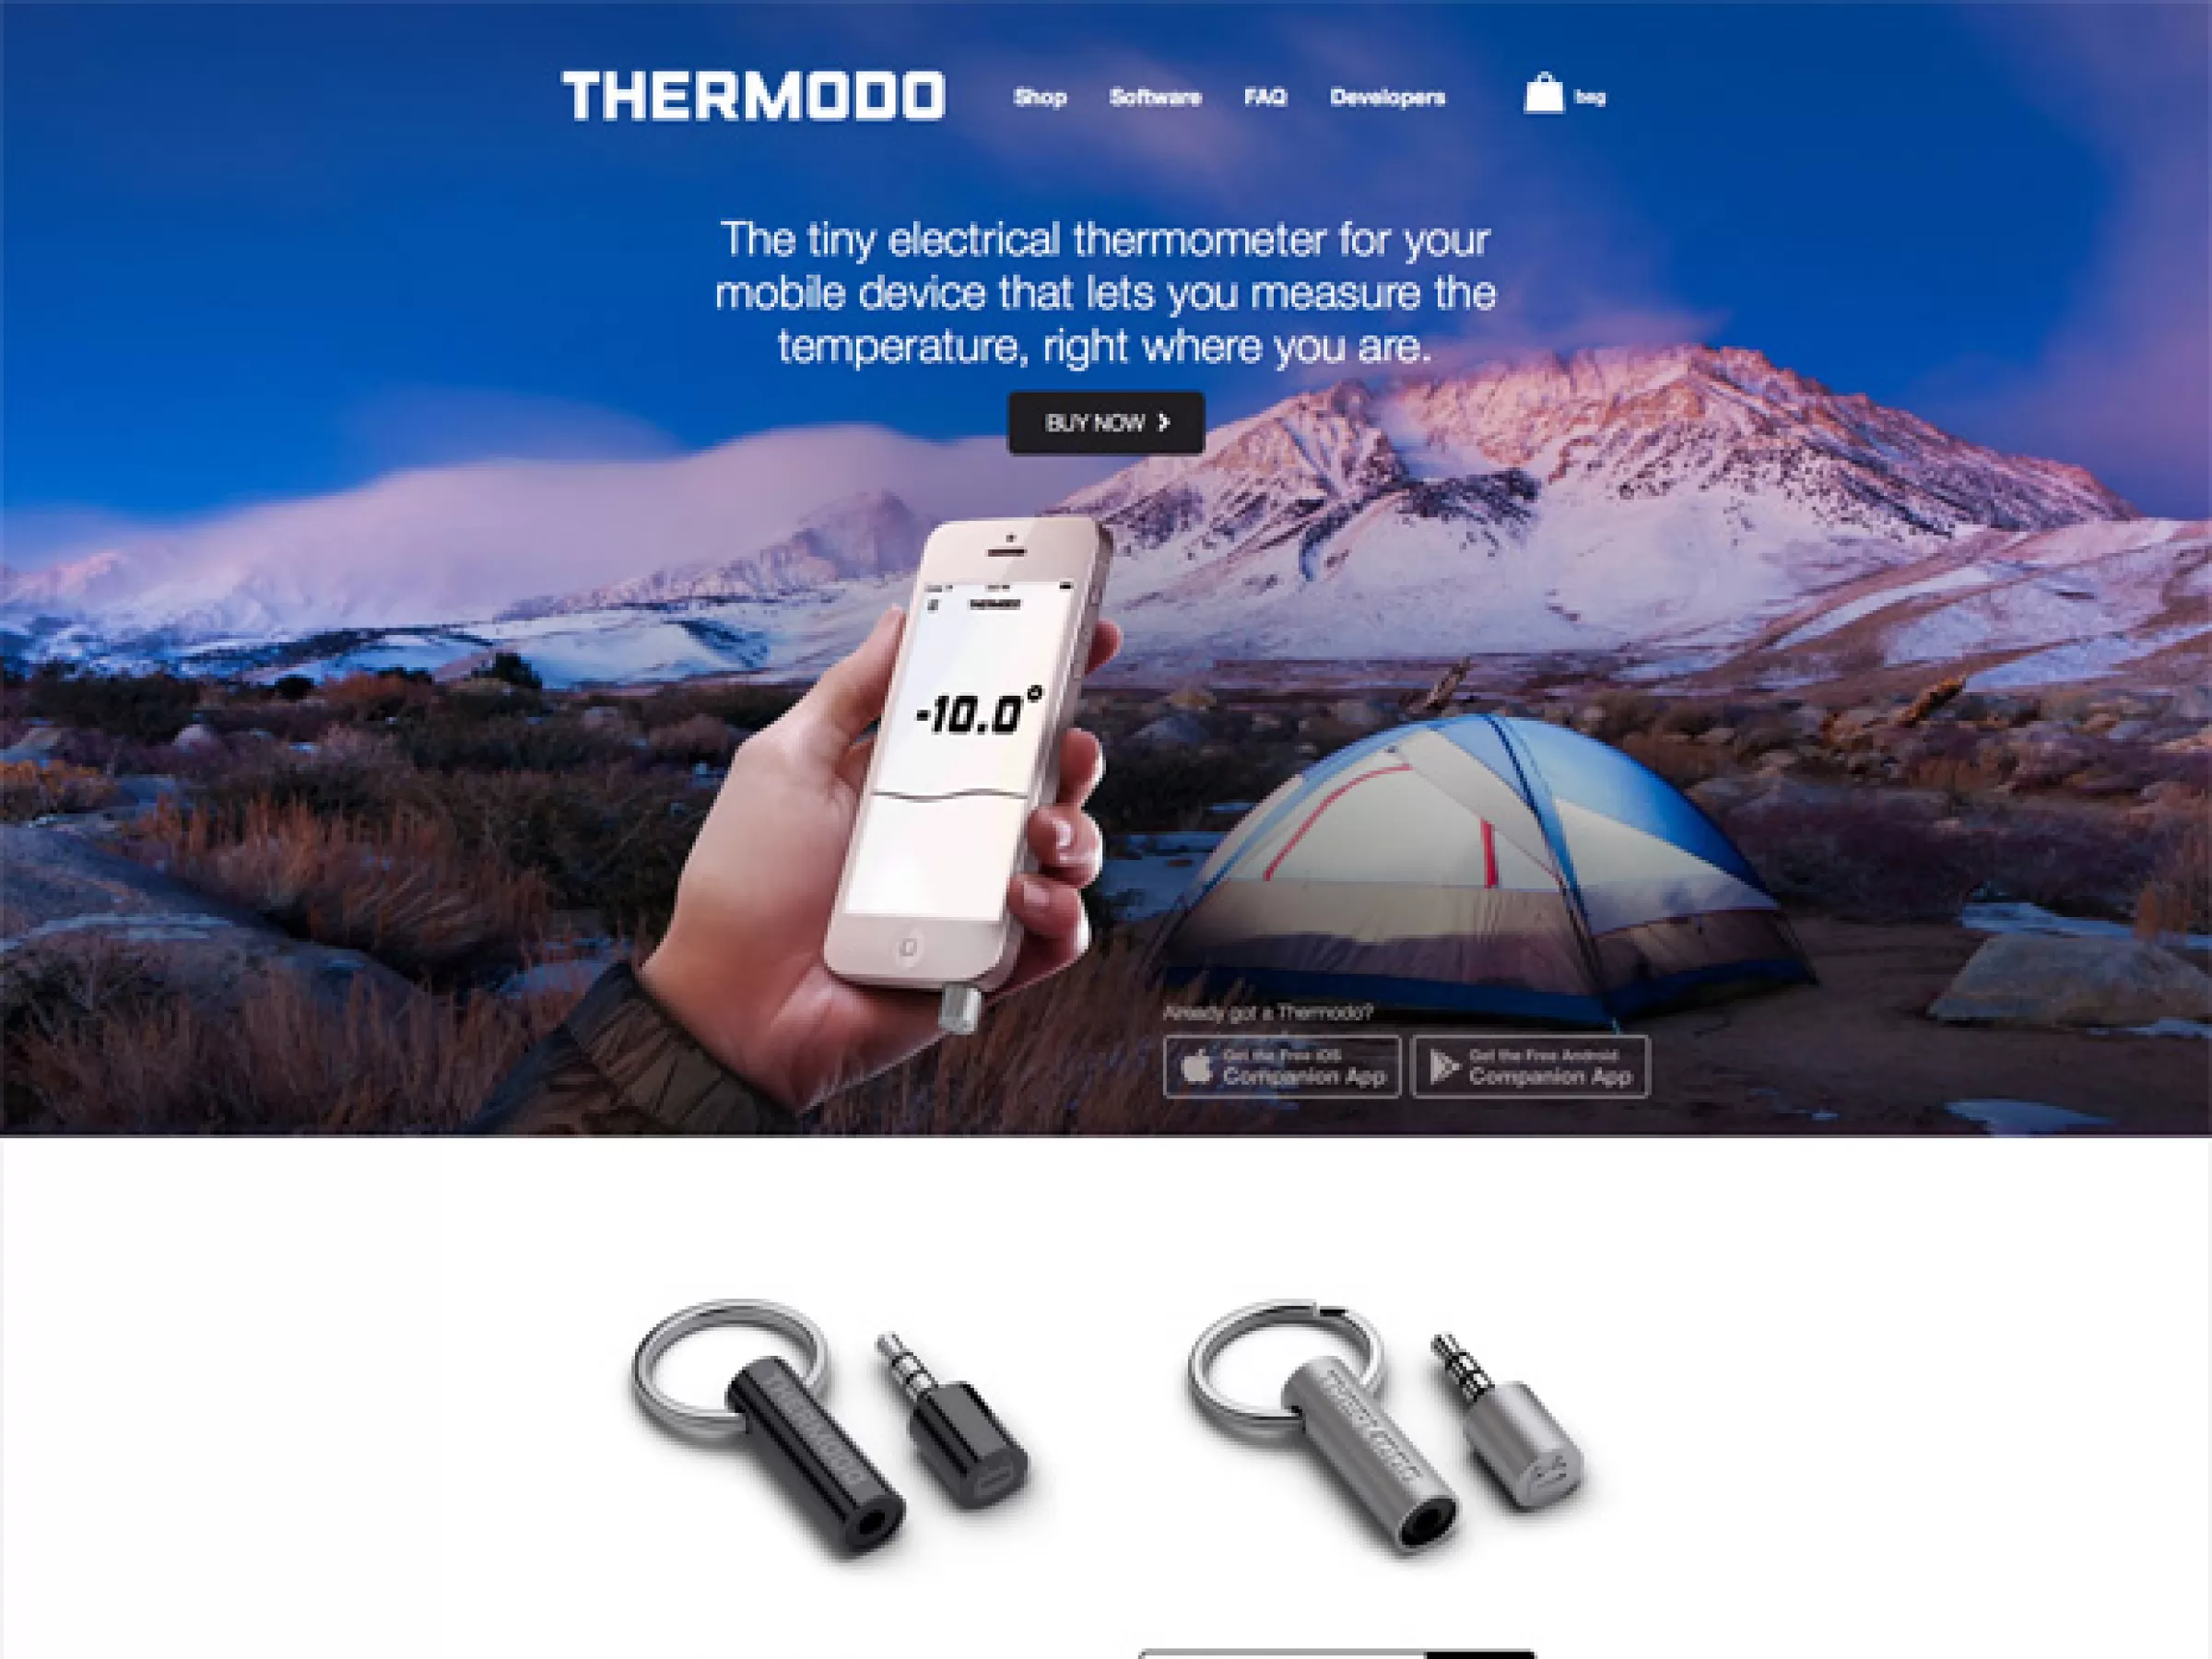 Thermodo The Tiny Thermometer for your mobile device 20140415